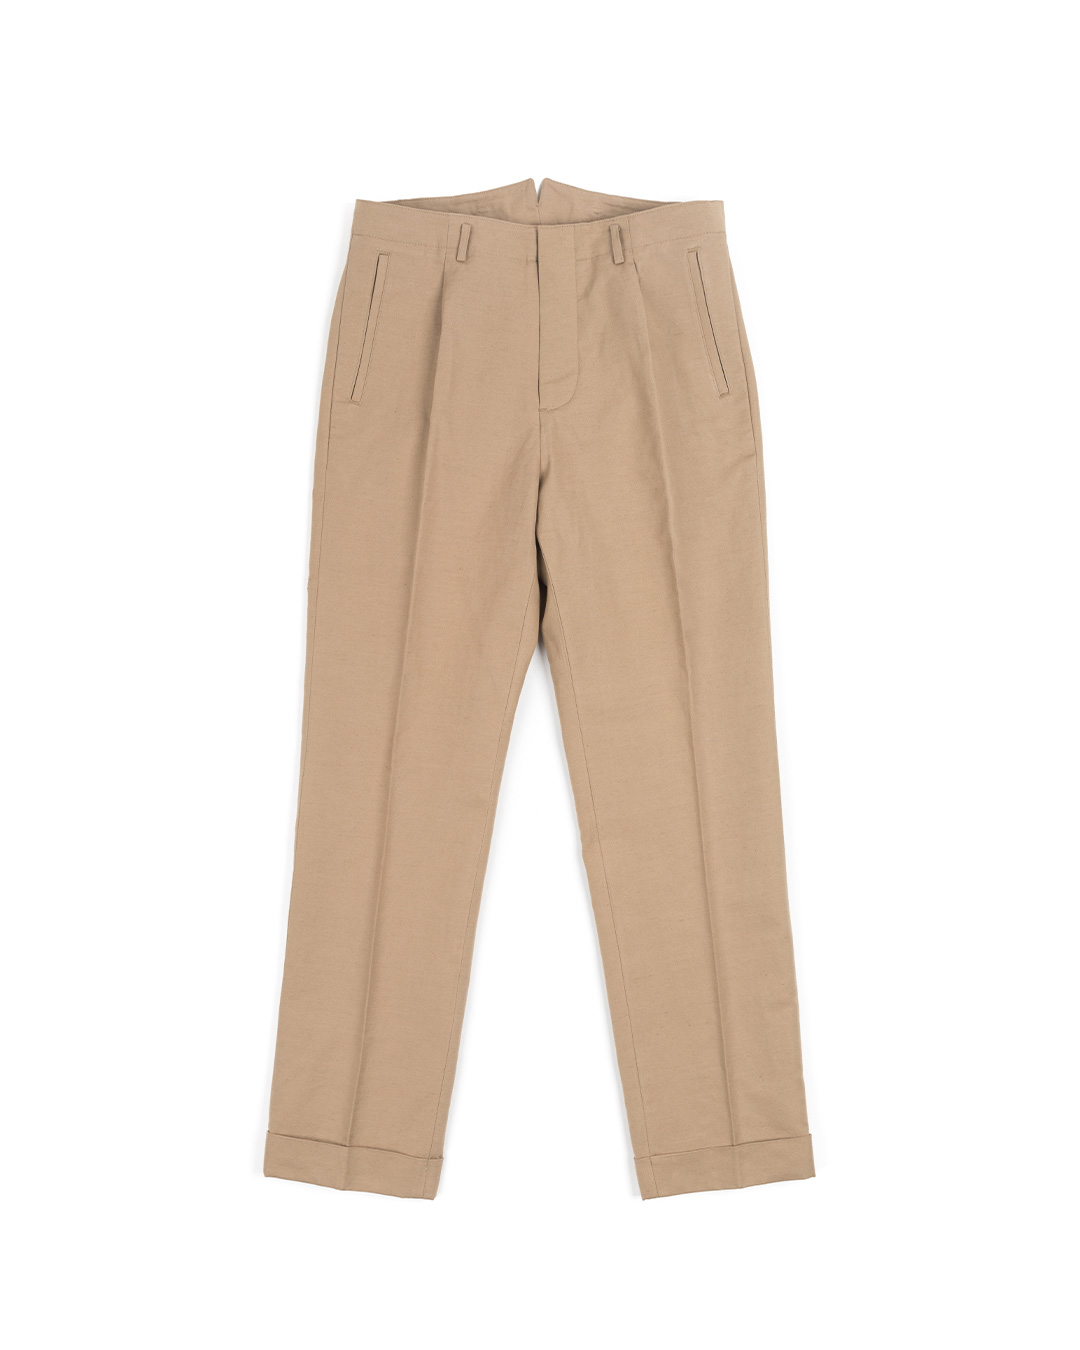 03 HOLLYWOOD TOP TROUSERS (beige)